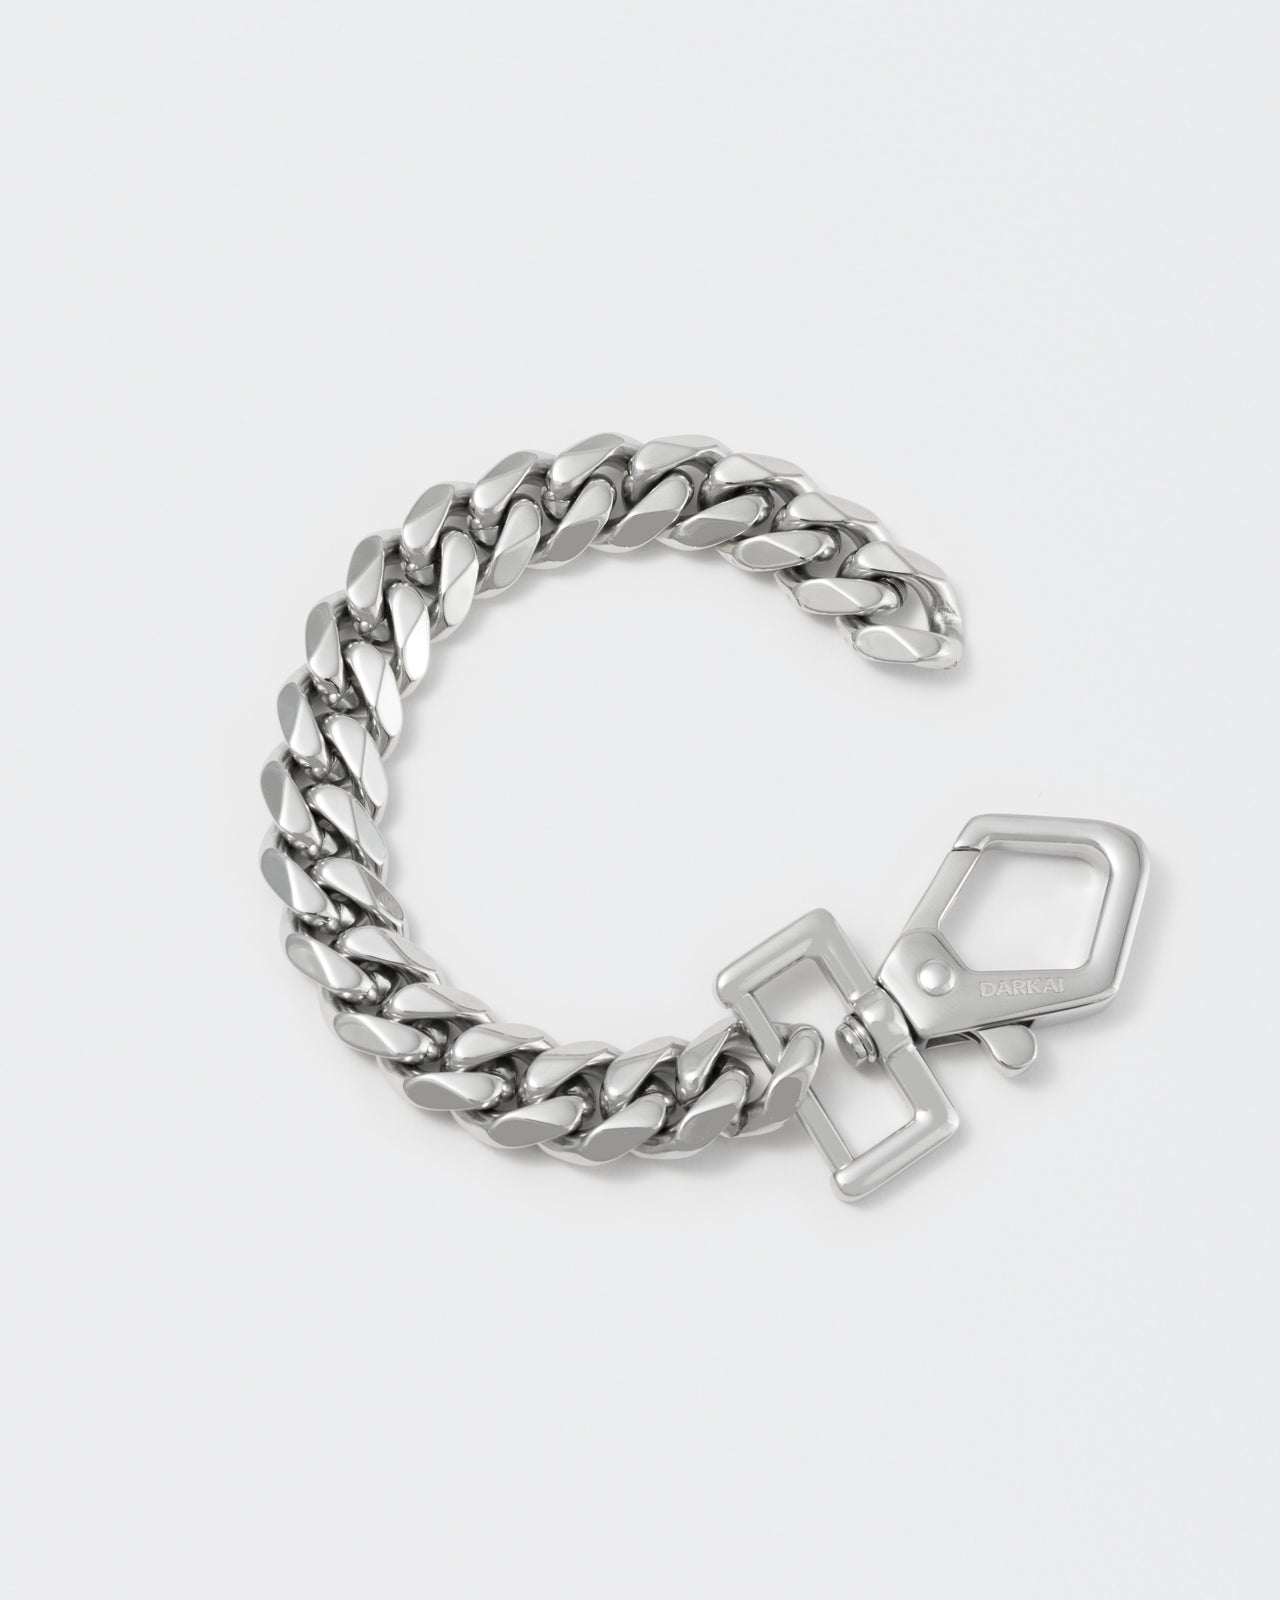 Cutting edge cuban chain bracelet with 18kt white gold coating and oversize carabiner clasp with engraved logo